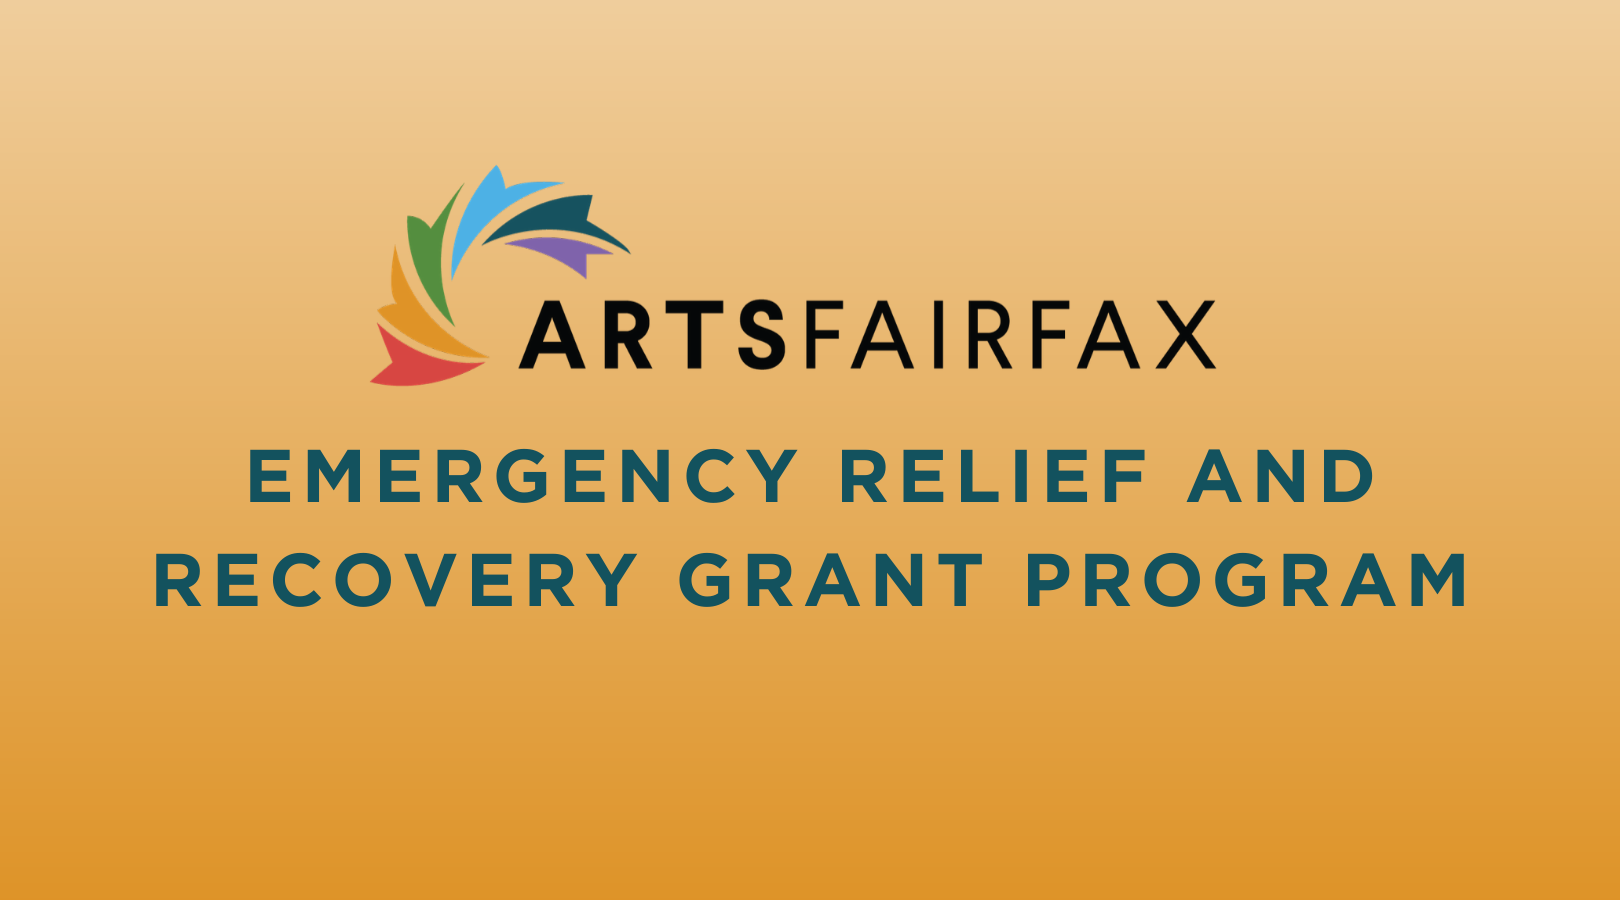 ARTSFAIRFAX Announces $100,000 Emergency Relief and Recovery Grant Program